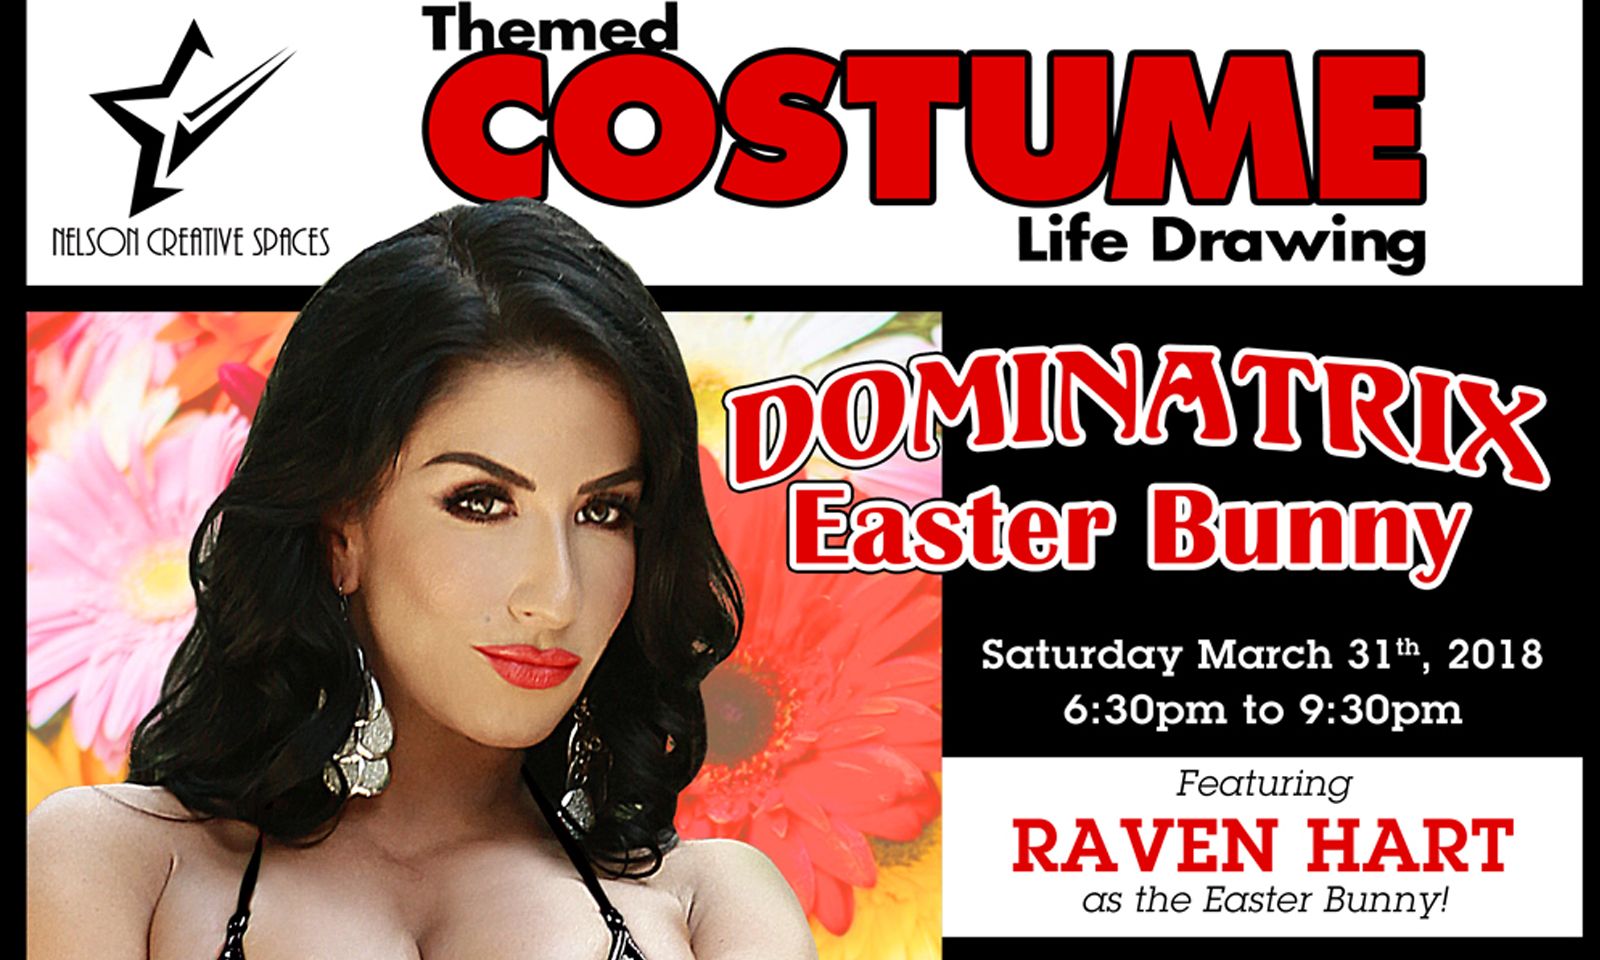 Raven Hart to Model as Dominatrix Easter Bunny